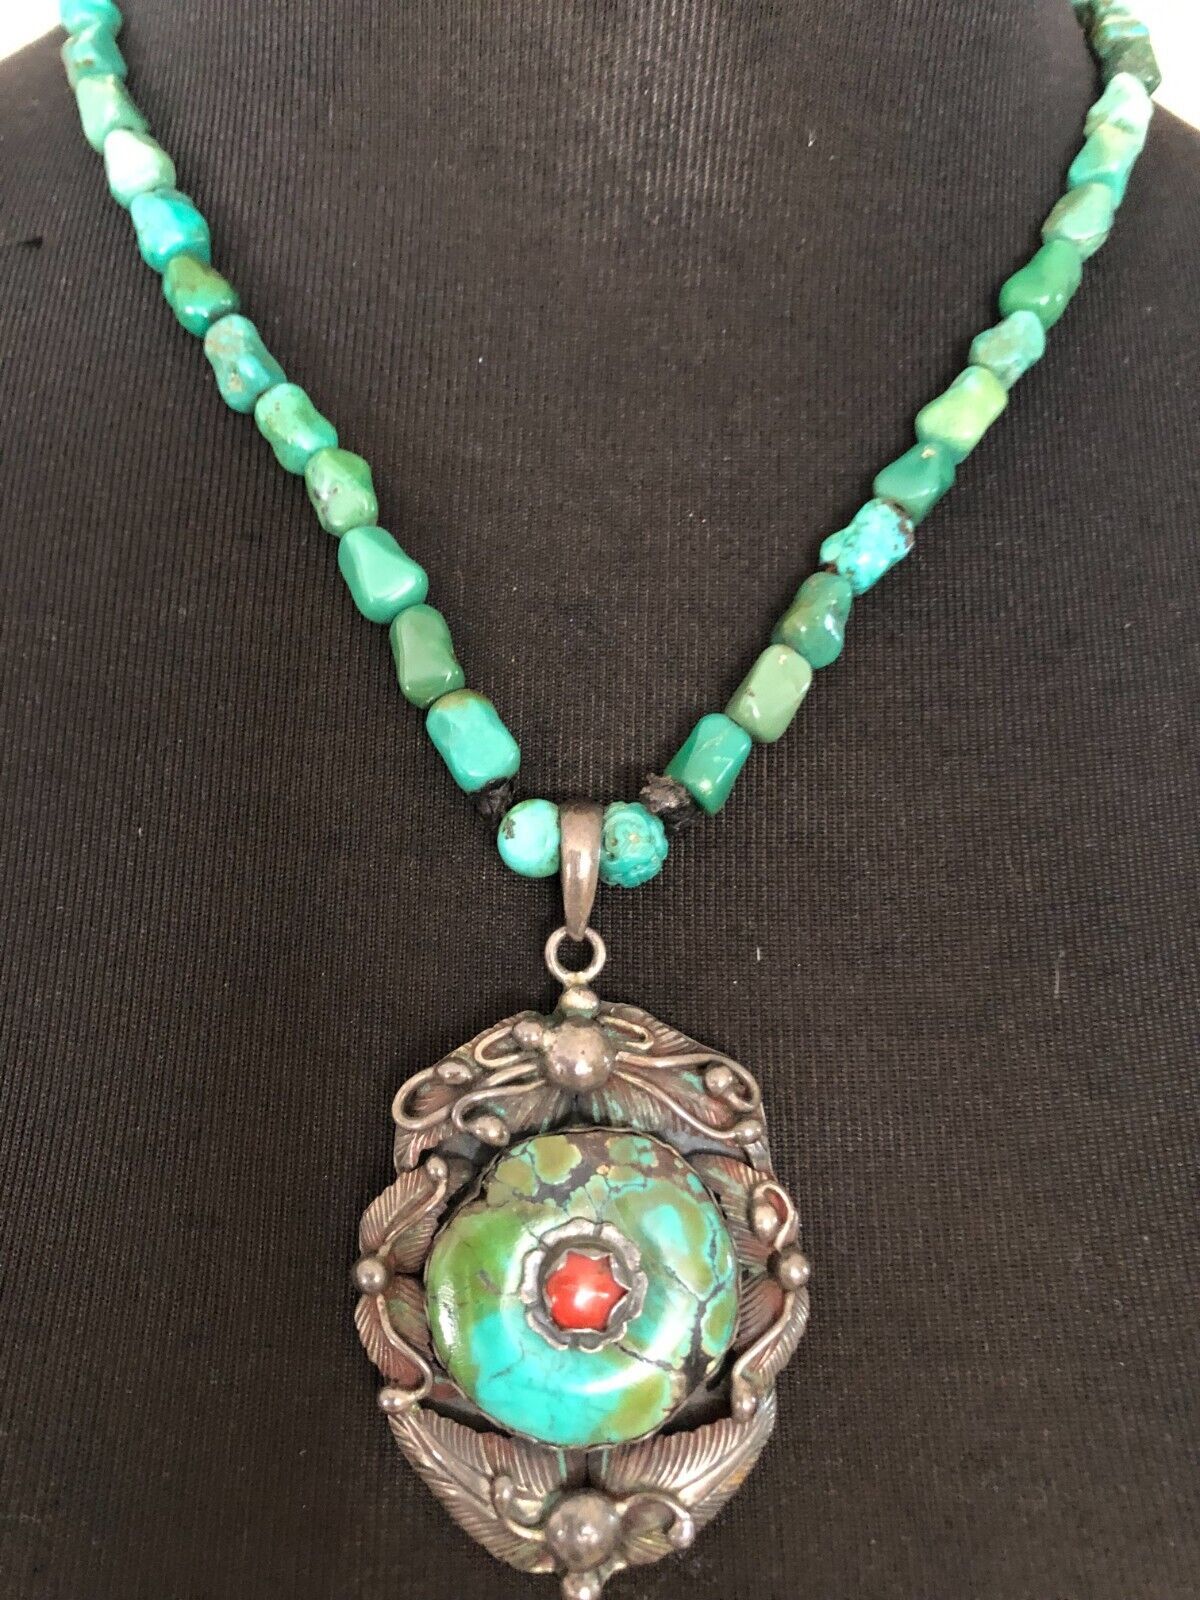 Vintage Nepalese Tibetan Style Turquoise & Coral Pendant on Turquoise necklace - $150.00